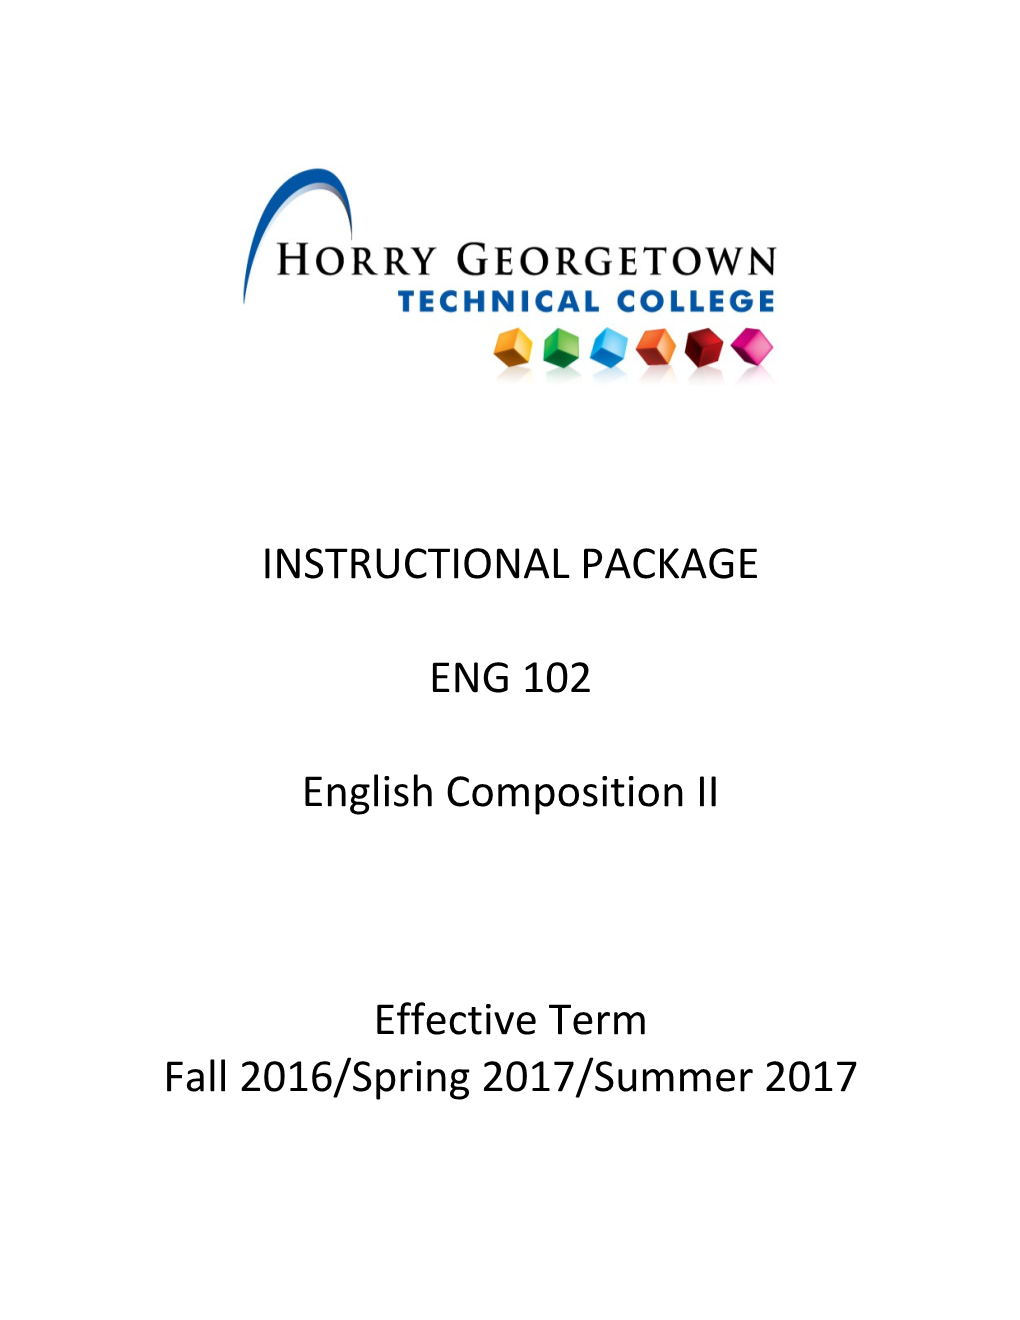 Instructional Package s3